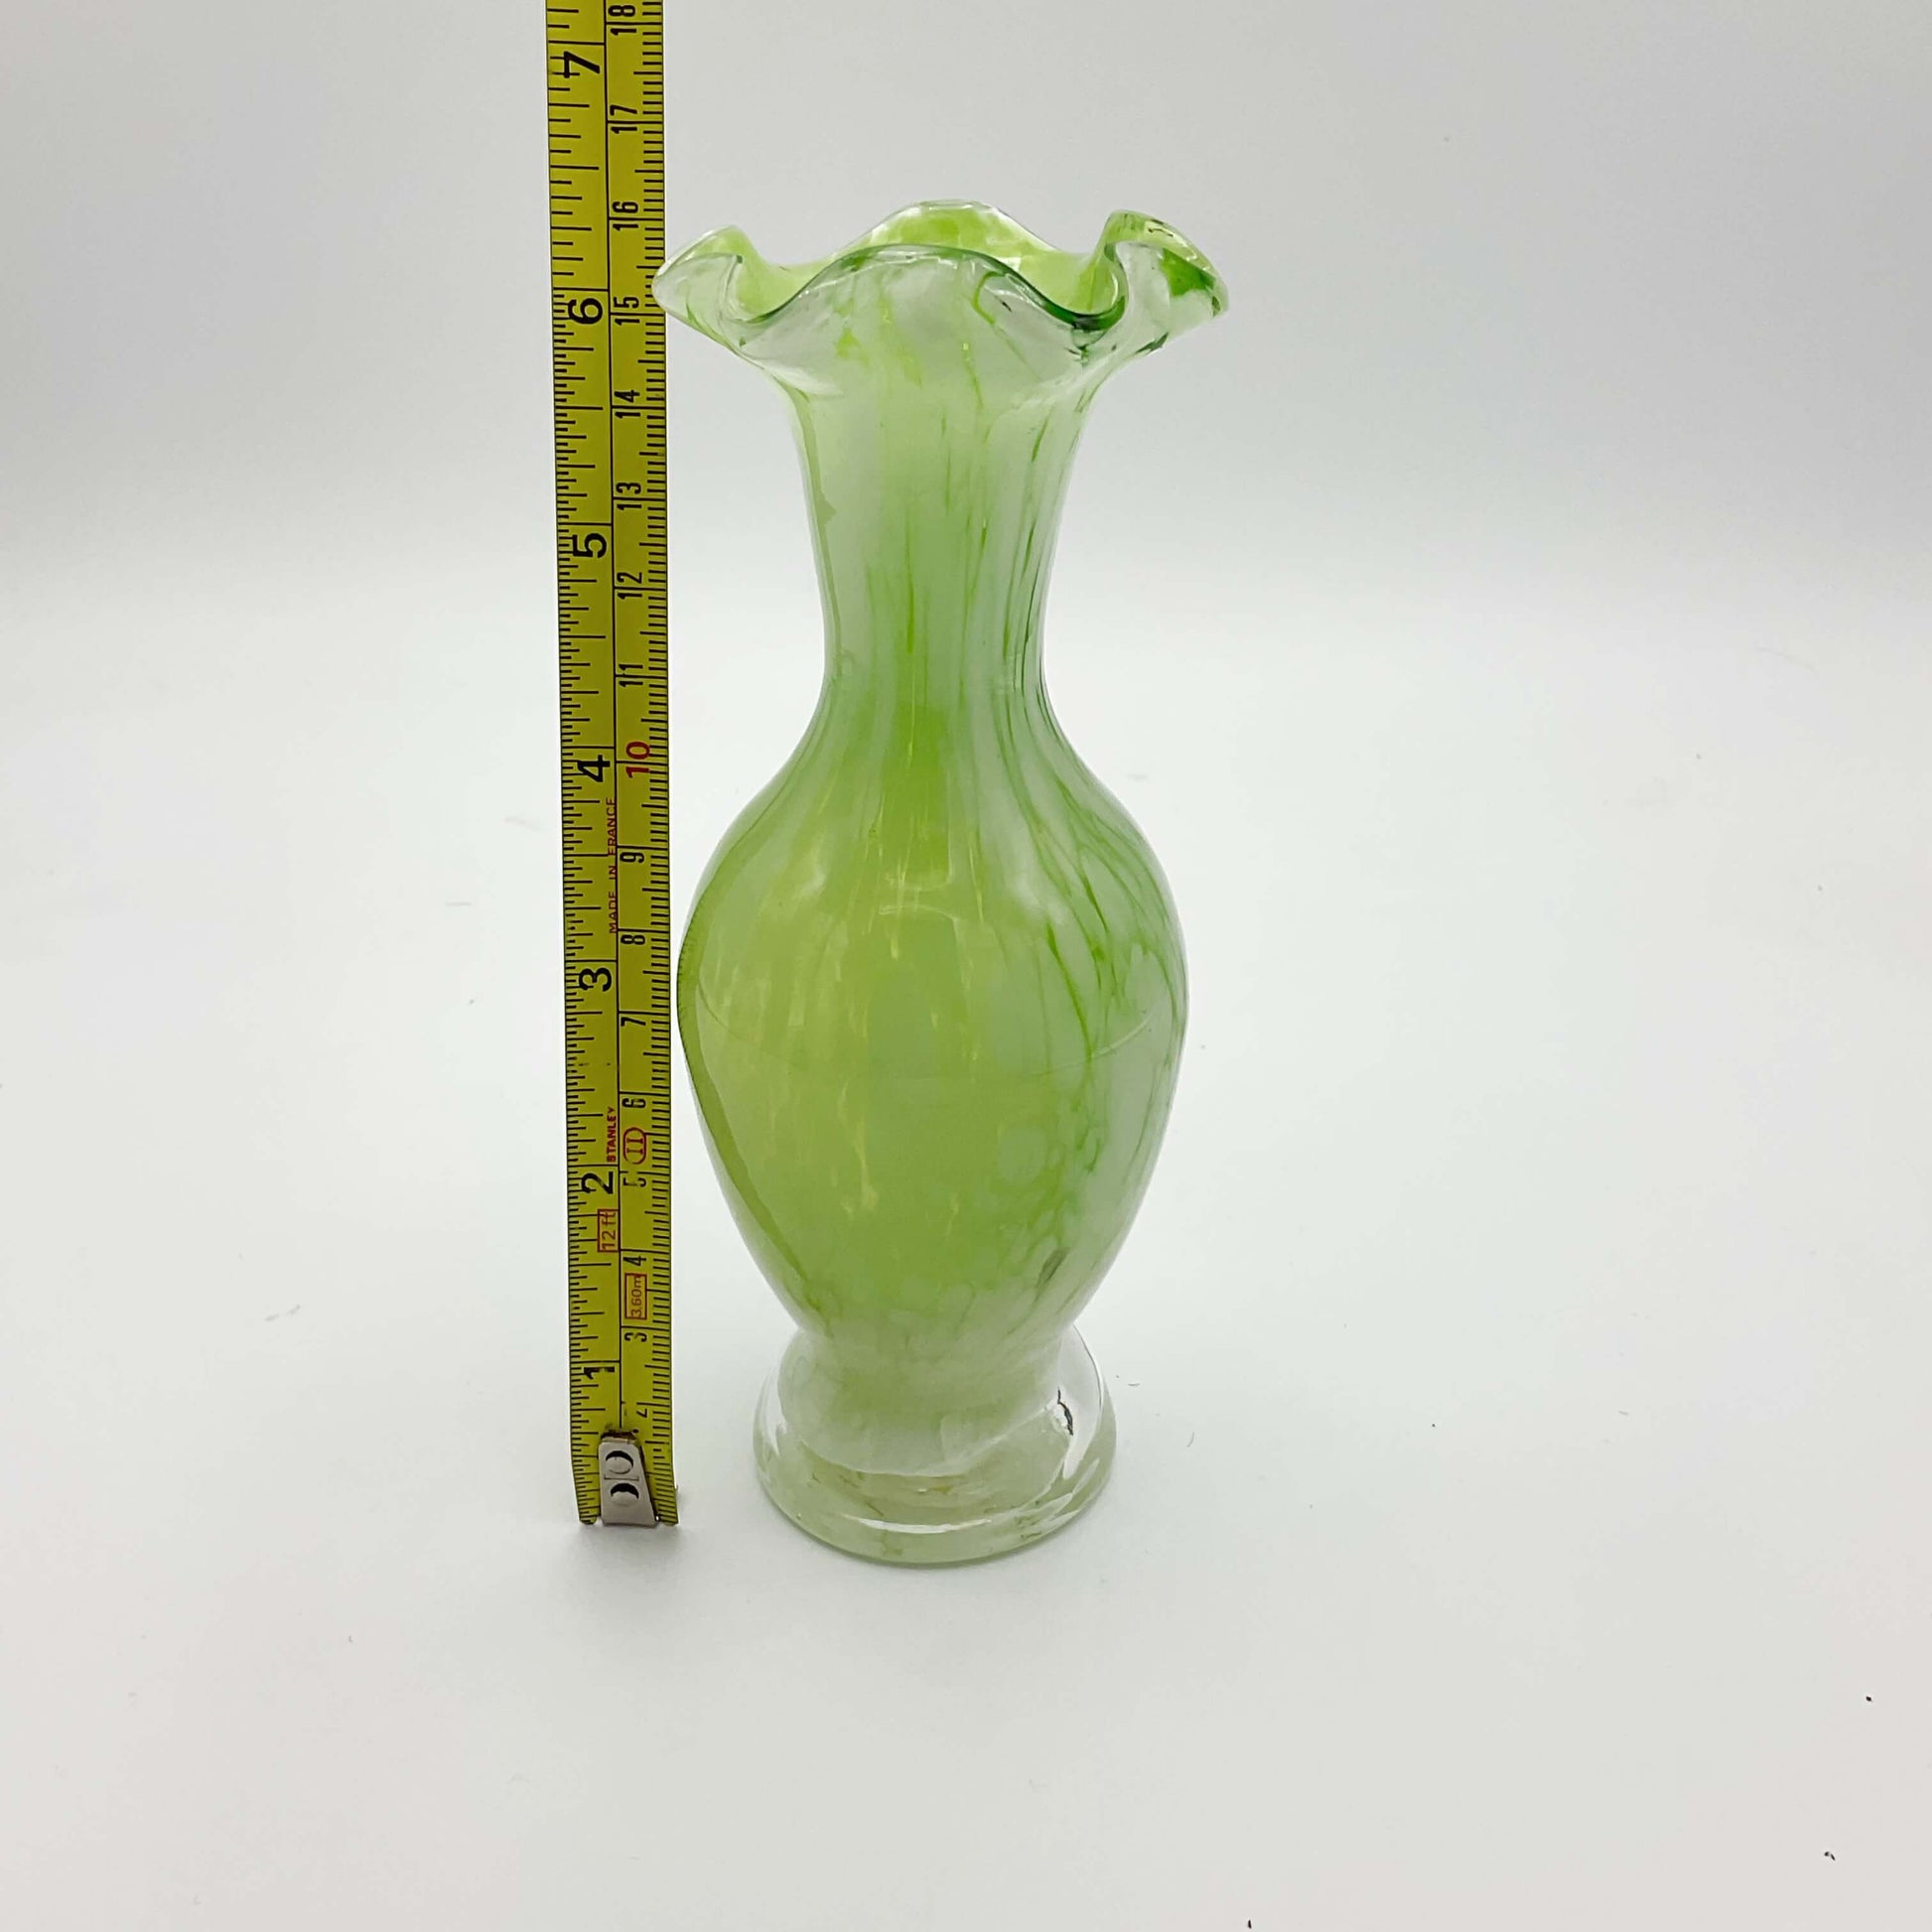 Green and white Murano glass bud vase from the 1960s on a white background Next to a tape measure showing it’s height as 16cm